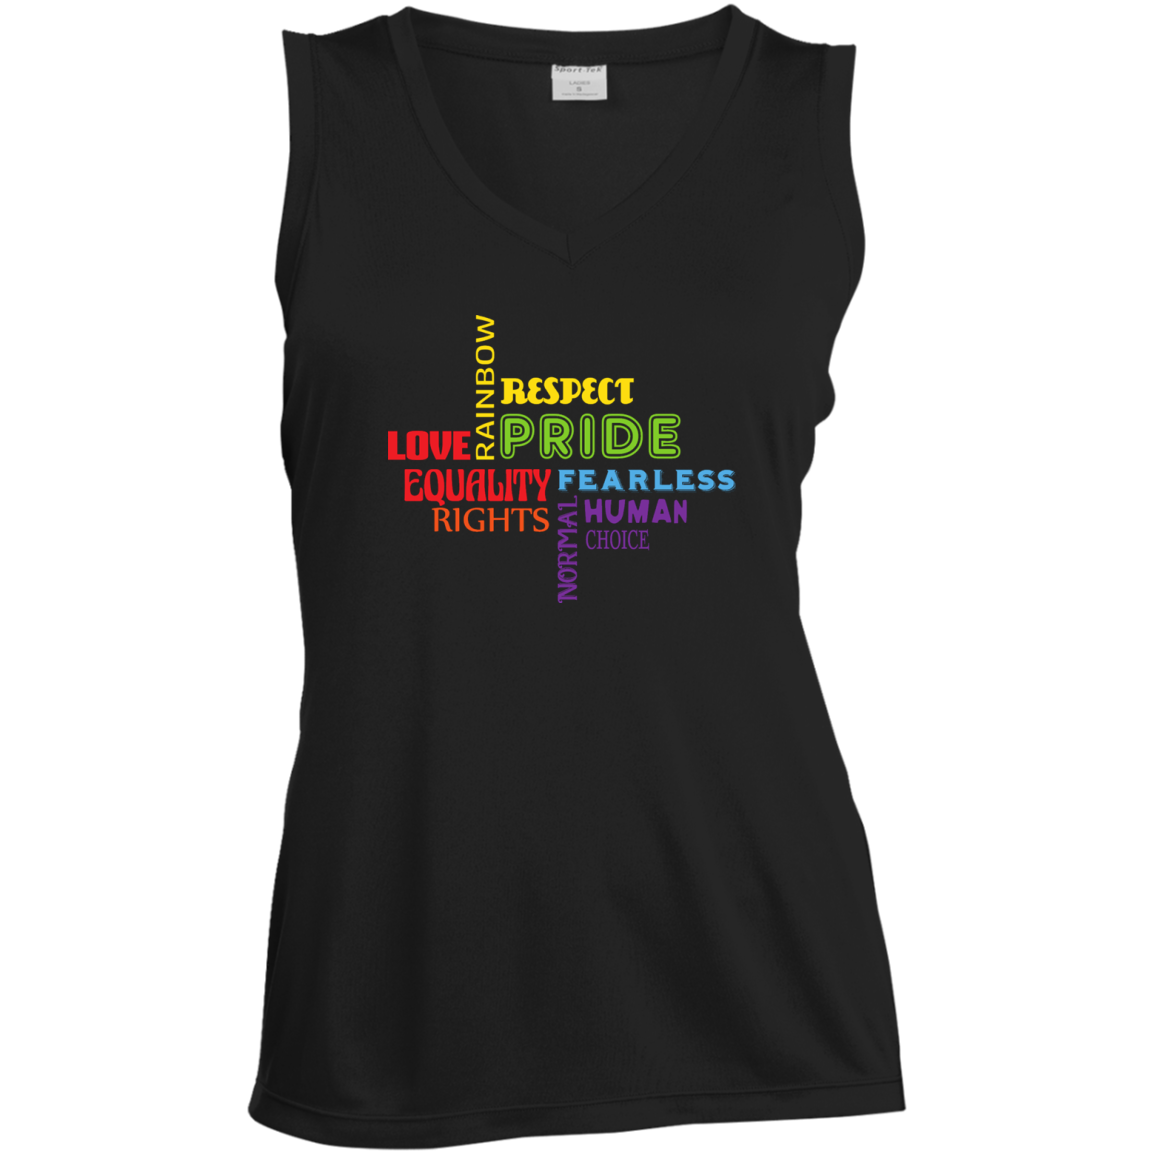 "Love Equality Rights" T Shirt for LGBT Community